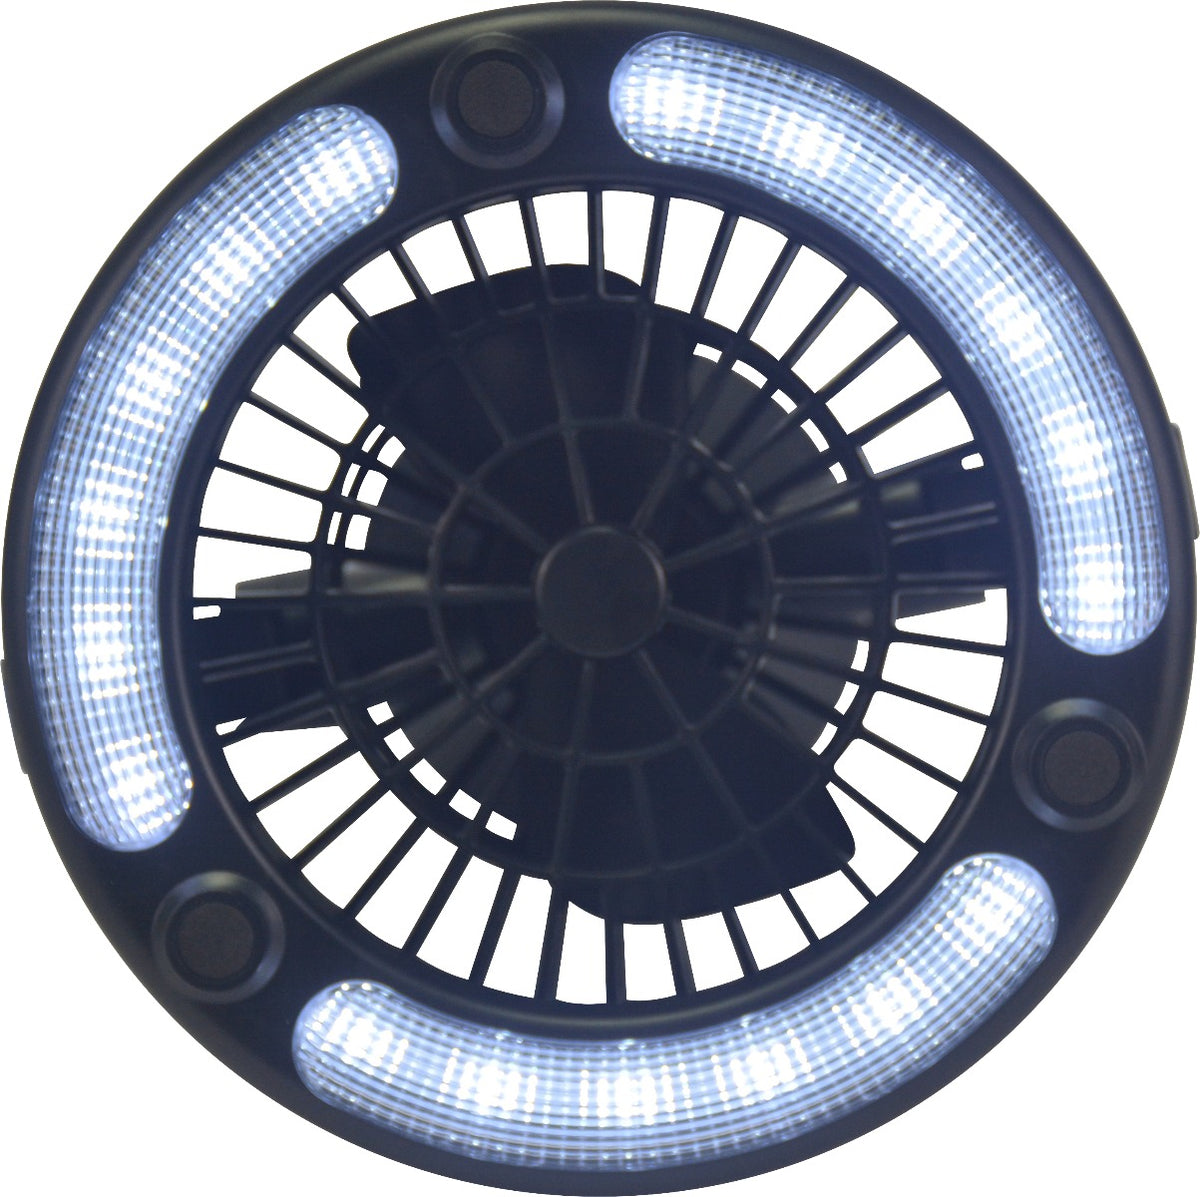 PORTABLE 2 IN 1 LED LIGHT AND FAN